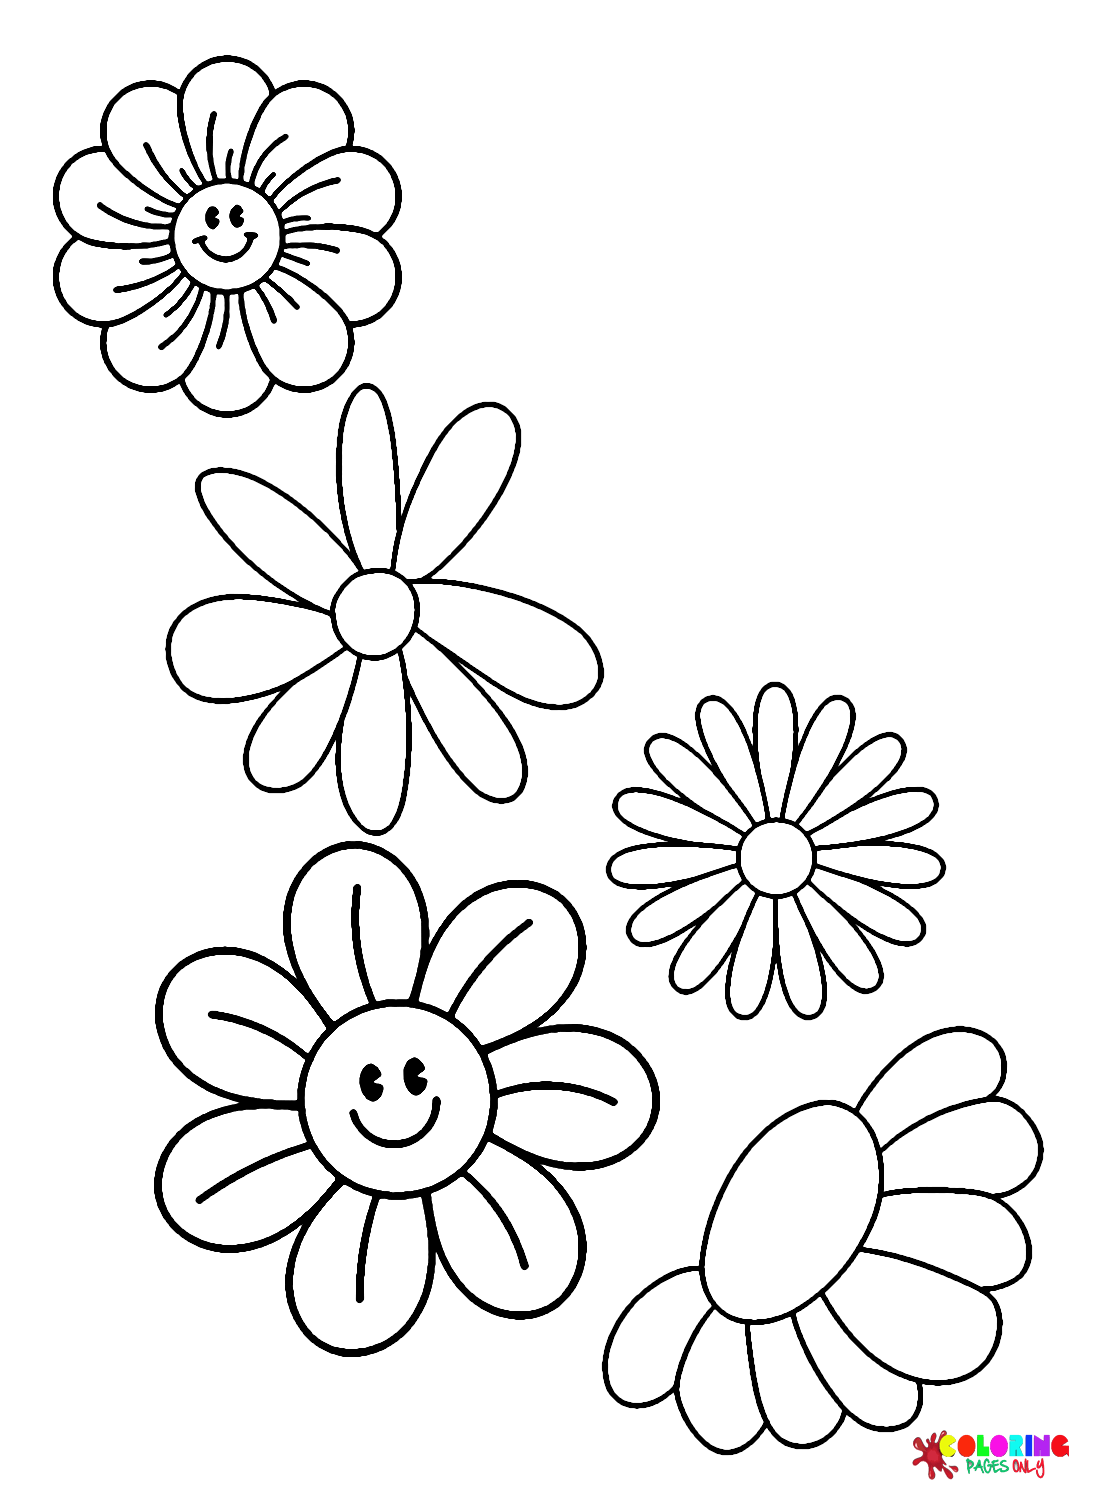 Daisy Flowers Simple Coloring Page - Free Printable Coloring Pages